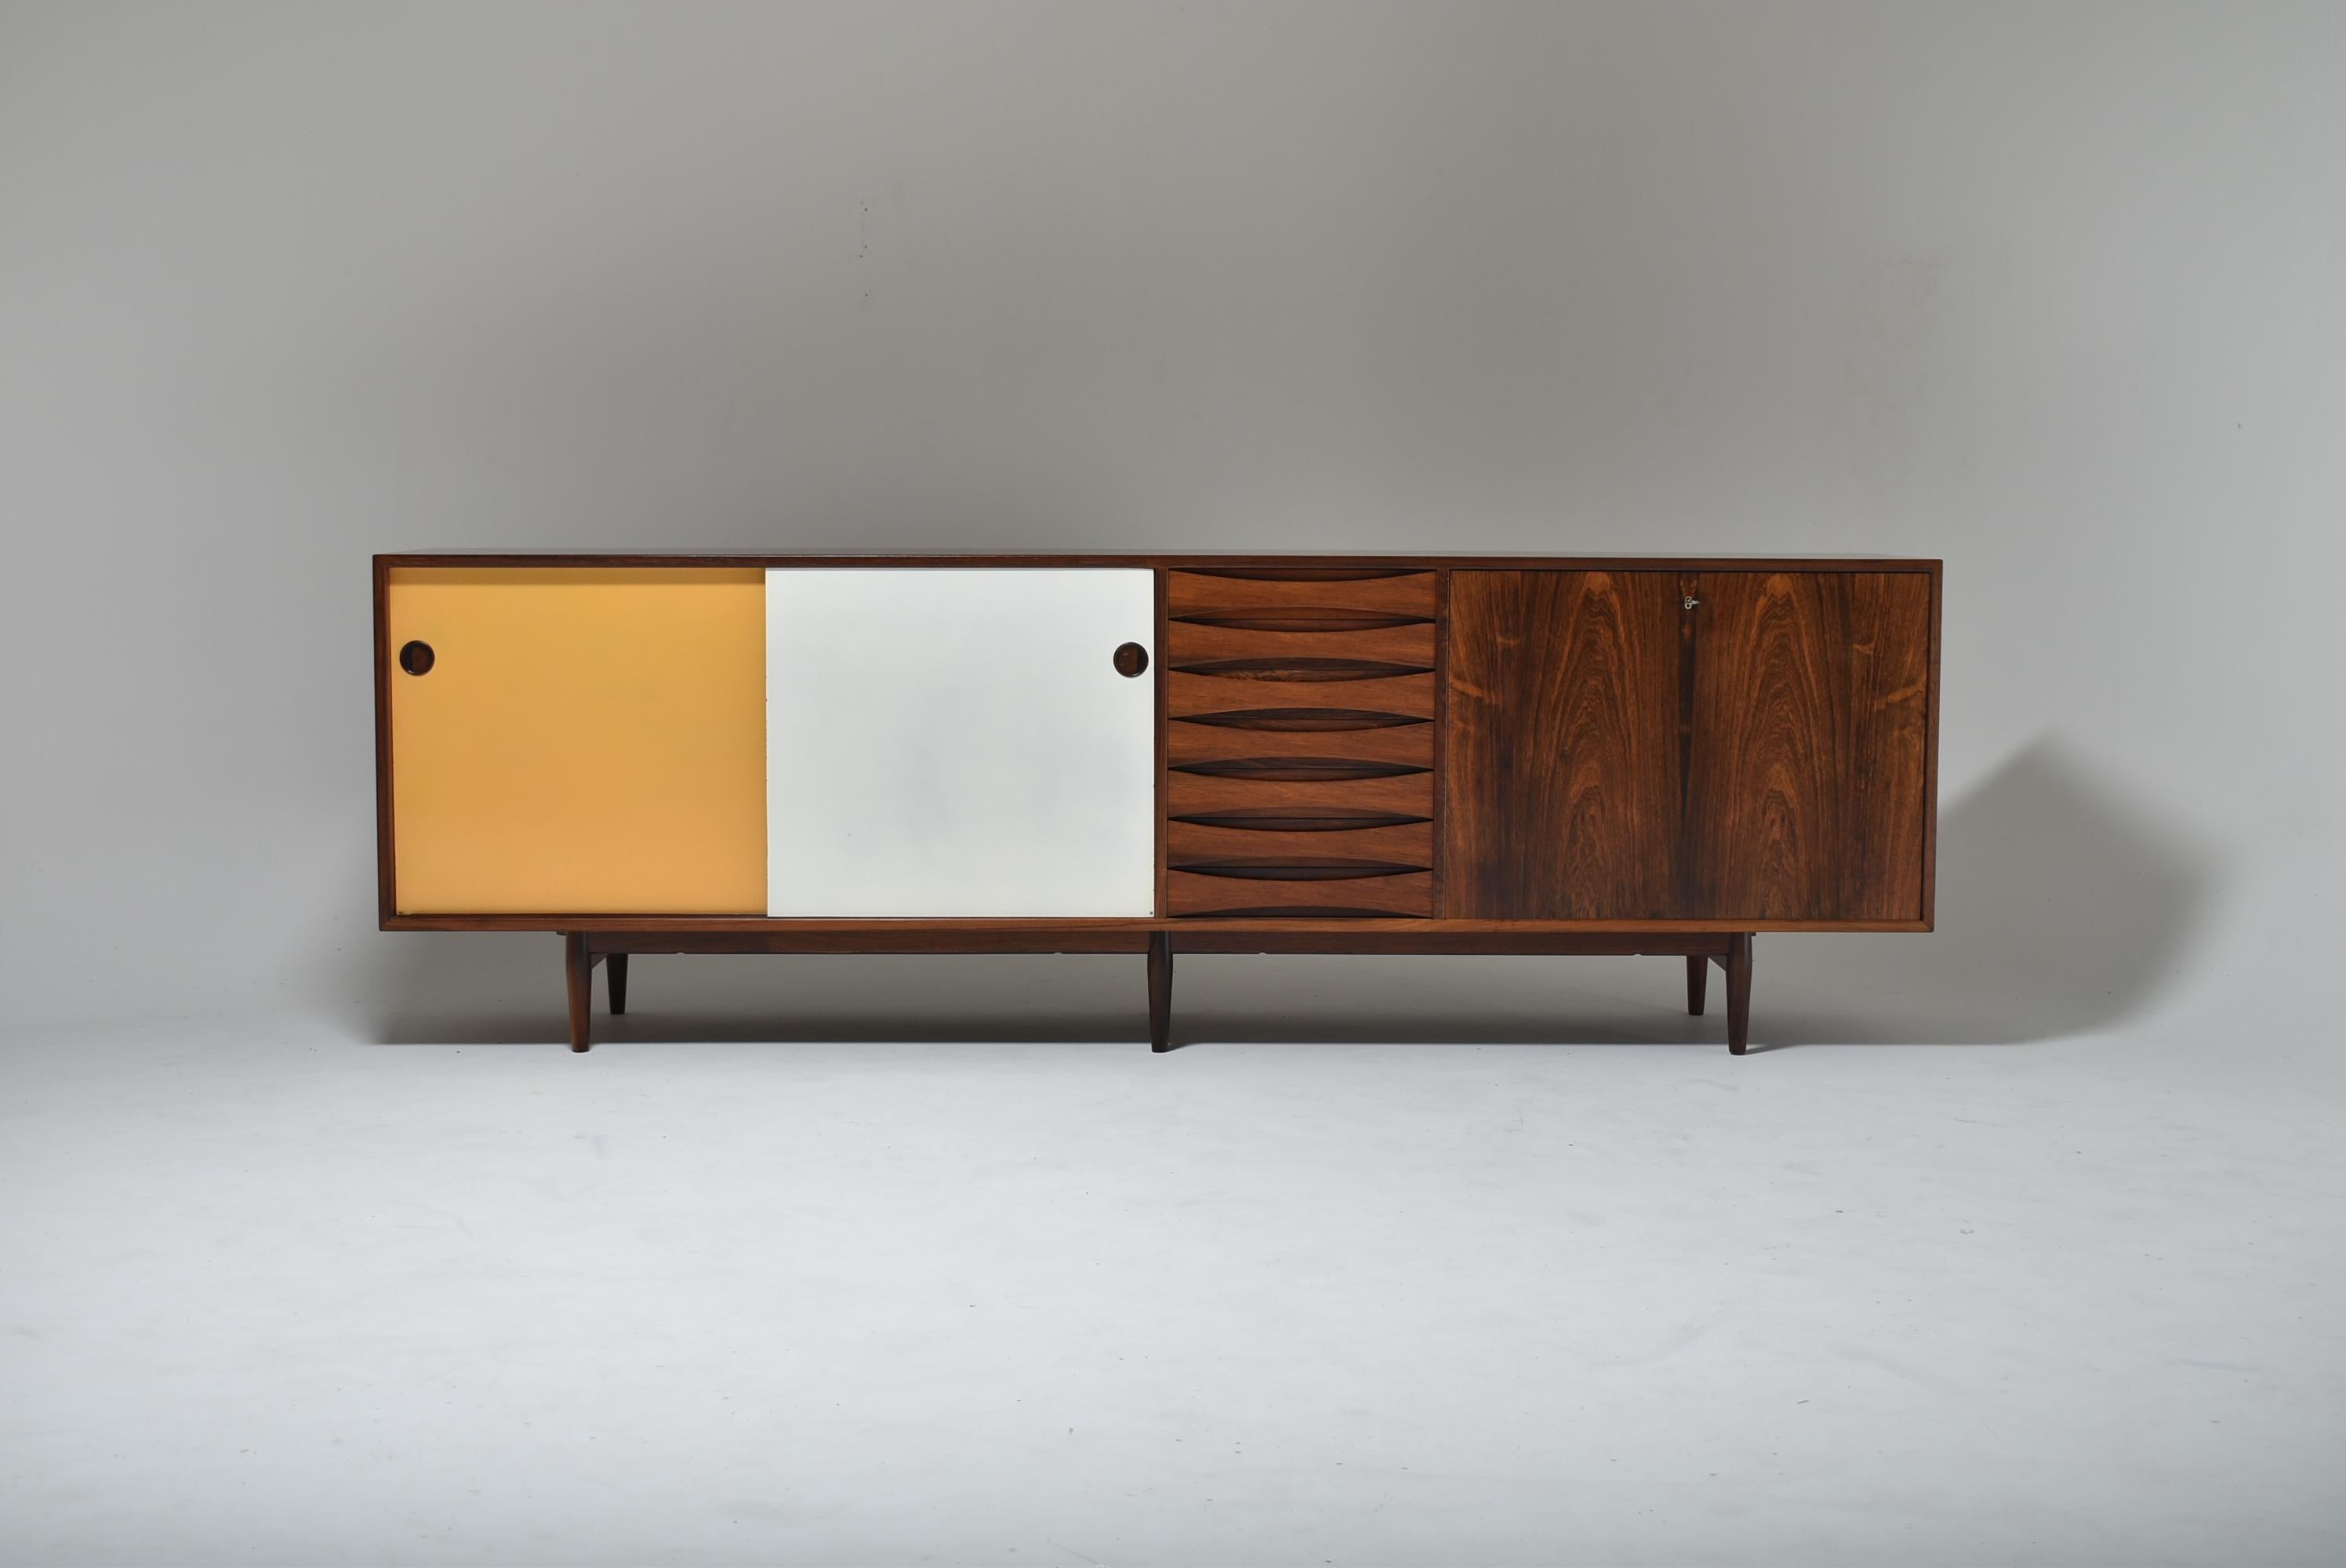 Santos Rosewood “29 A” Sideboard by Arne Vodder for Sibast, also refered as Triennale, Denmark, late 1950s.
This iconic piece of furniture was designed by Arne Vodder for Milan's triennale fair in 1969. 
Freestanding Santos rosewood sideboard on six